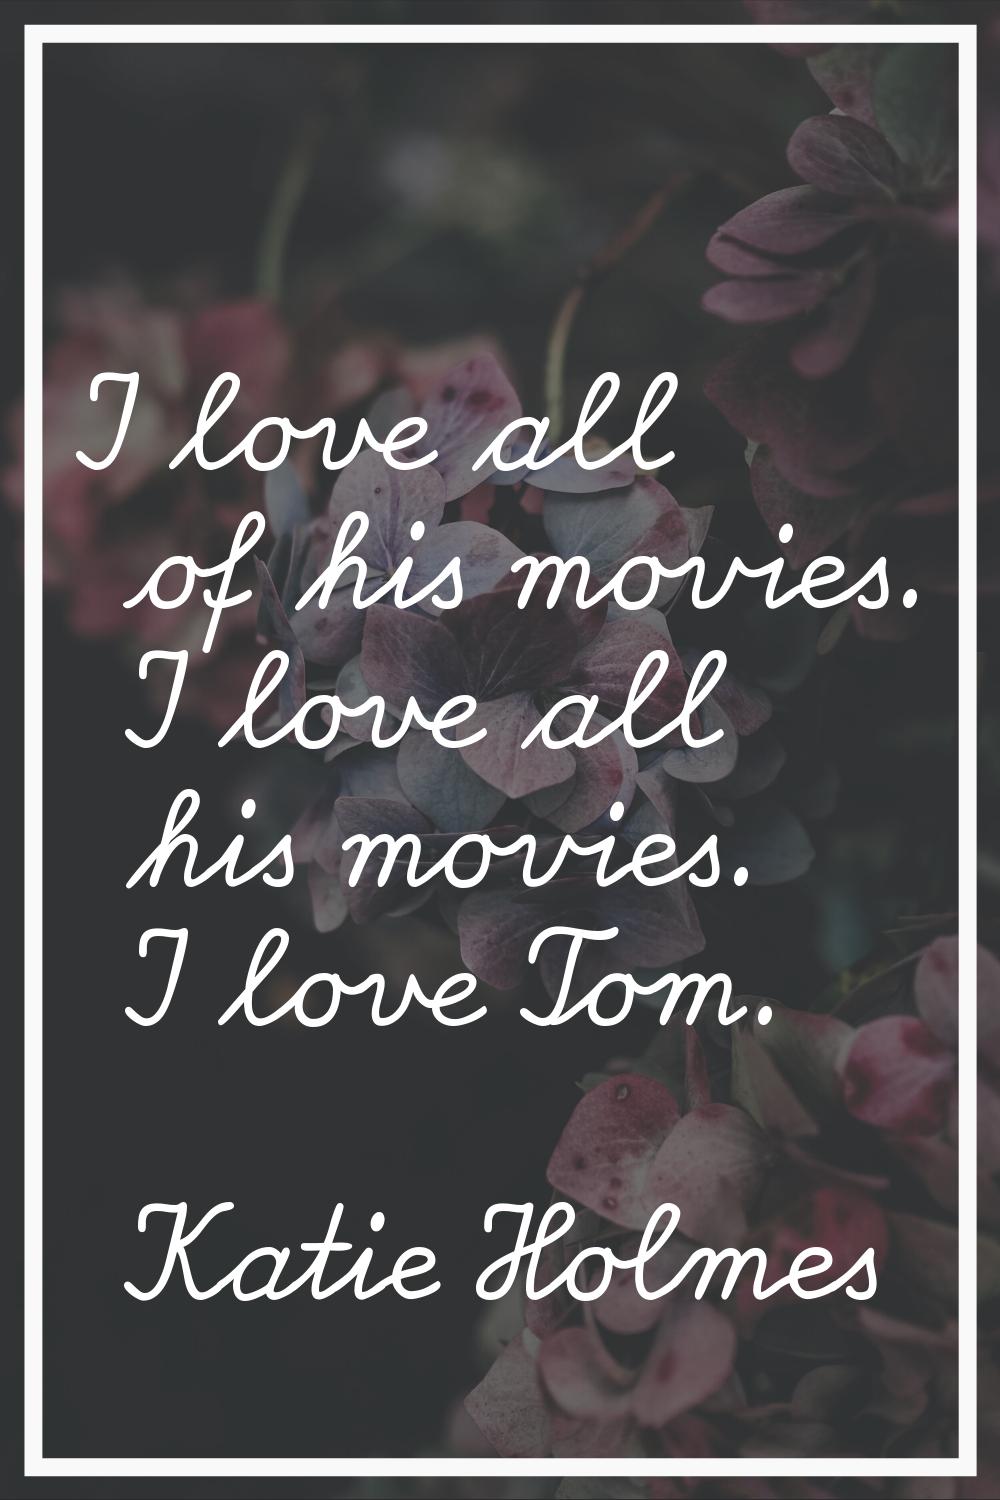 I love all of his movies. I love all his movies. I love Tom.